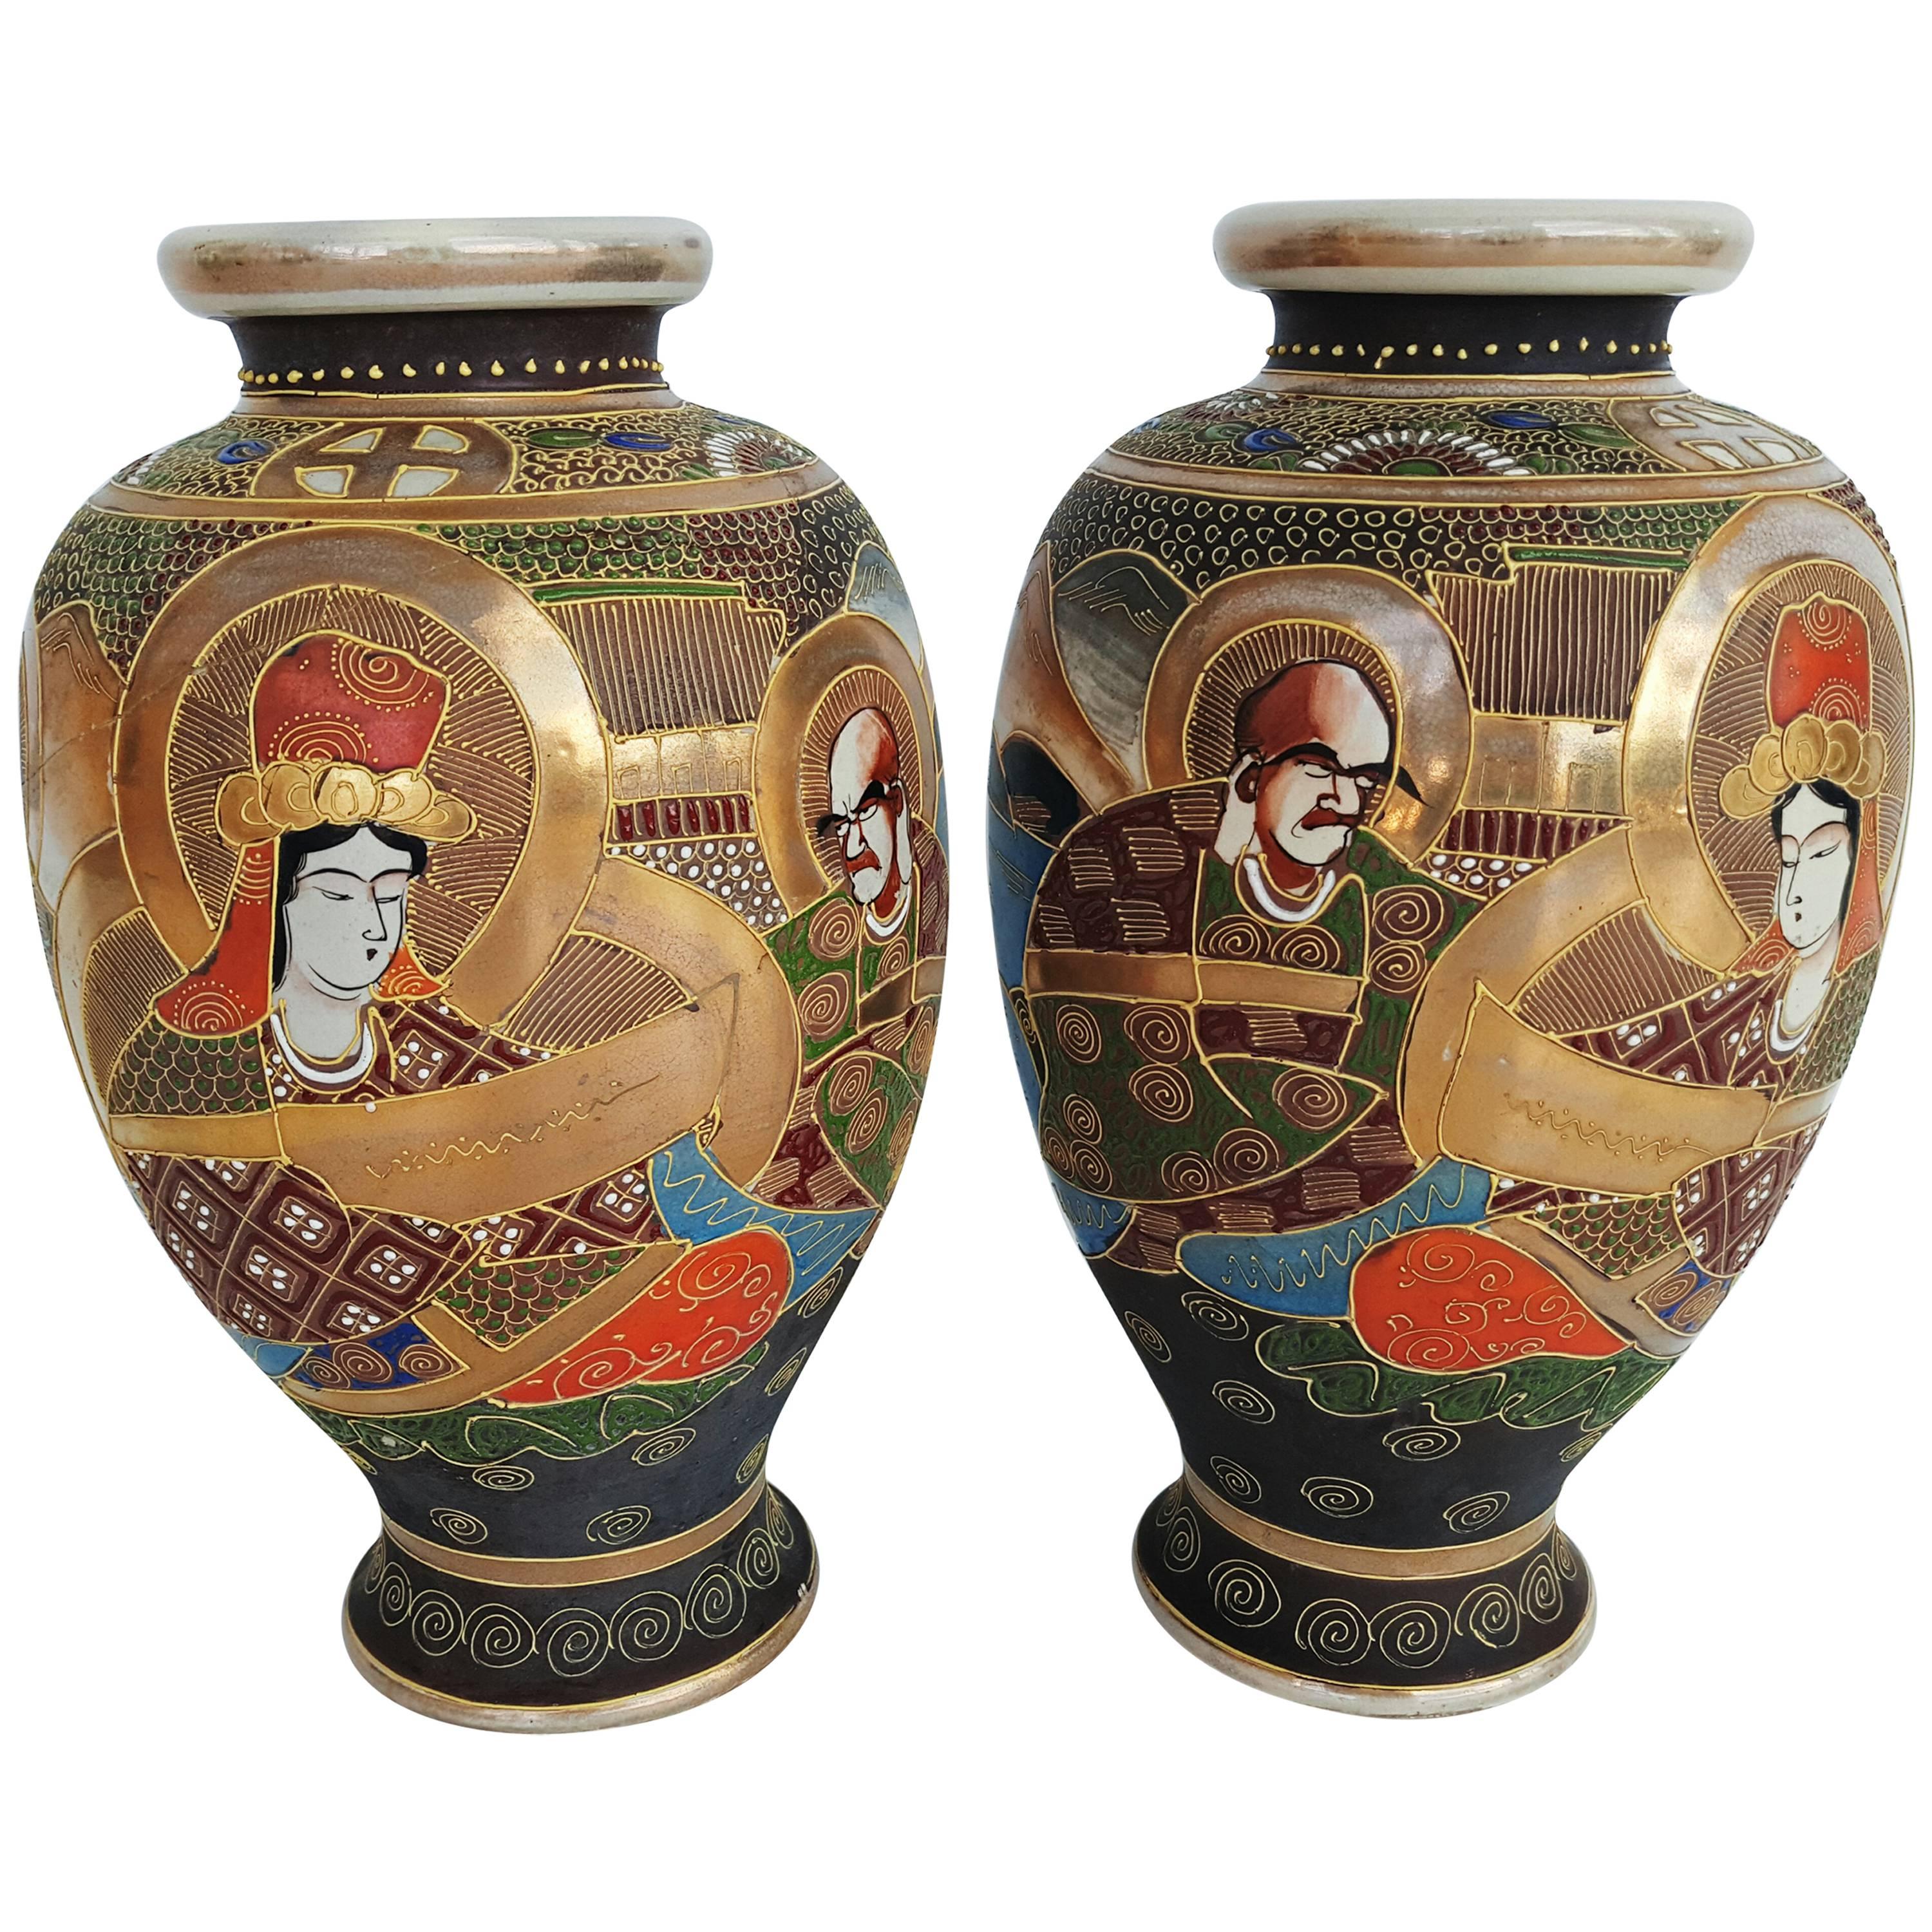 Early 20th Century Pair of Japanese Satsuma Vases in Painted Ceramic